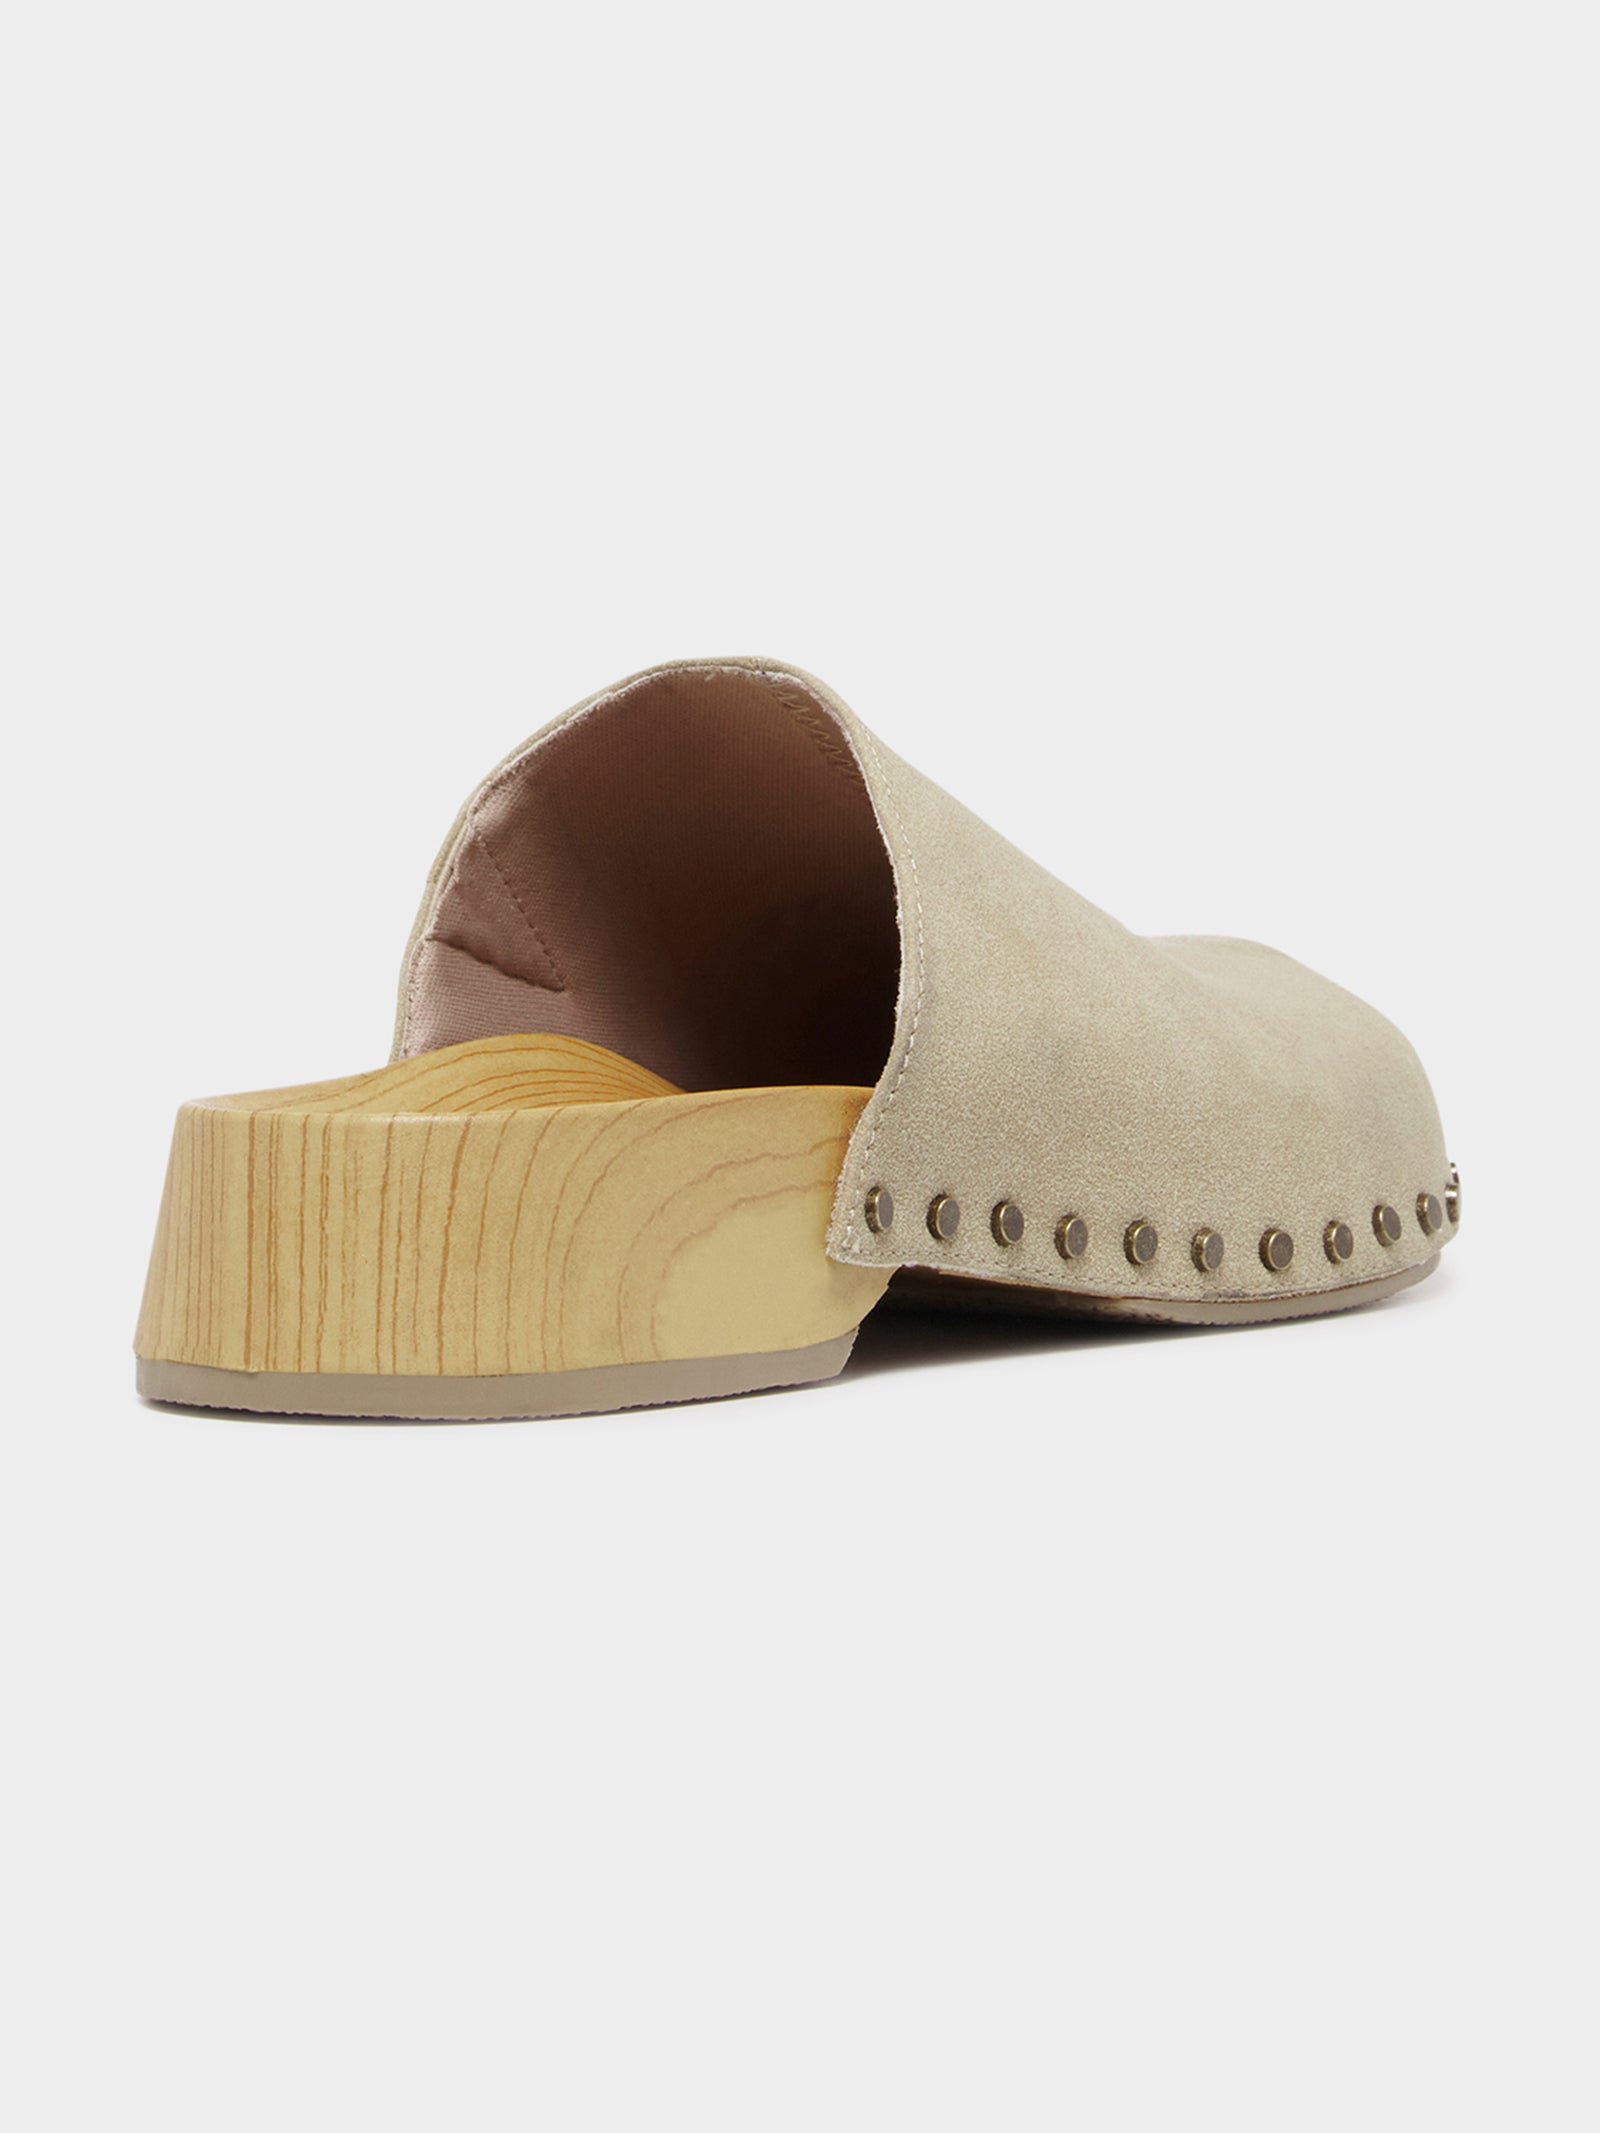 Womens Rhiannon Clogs in Taupe Suede